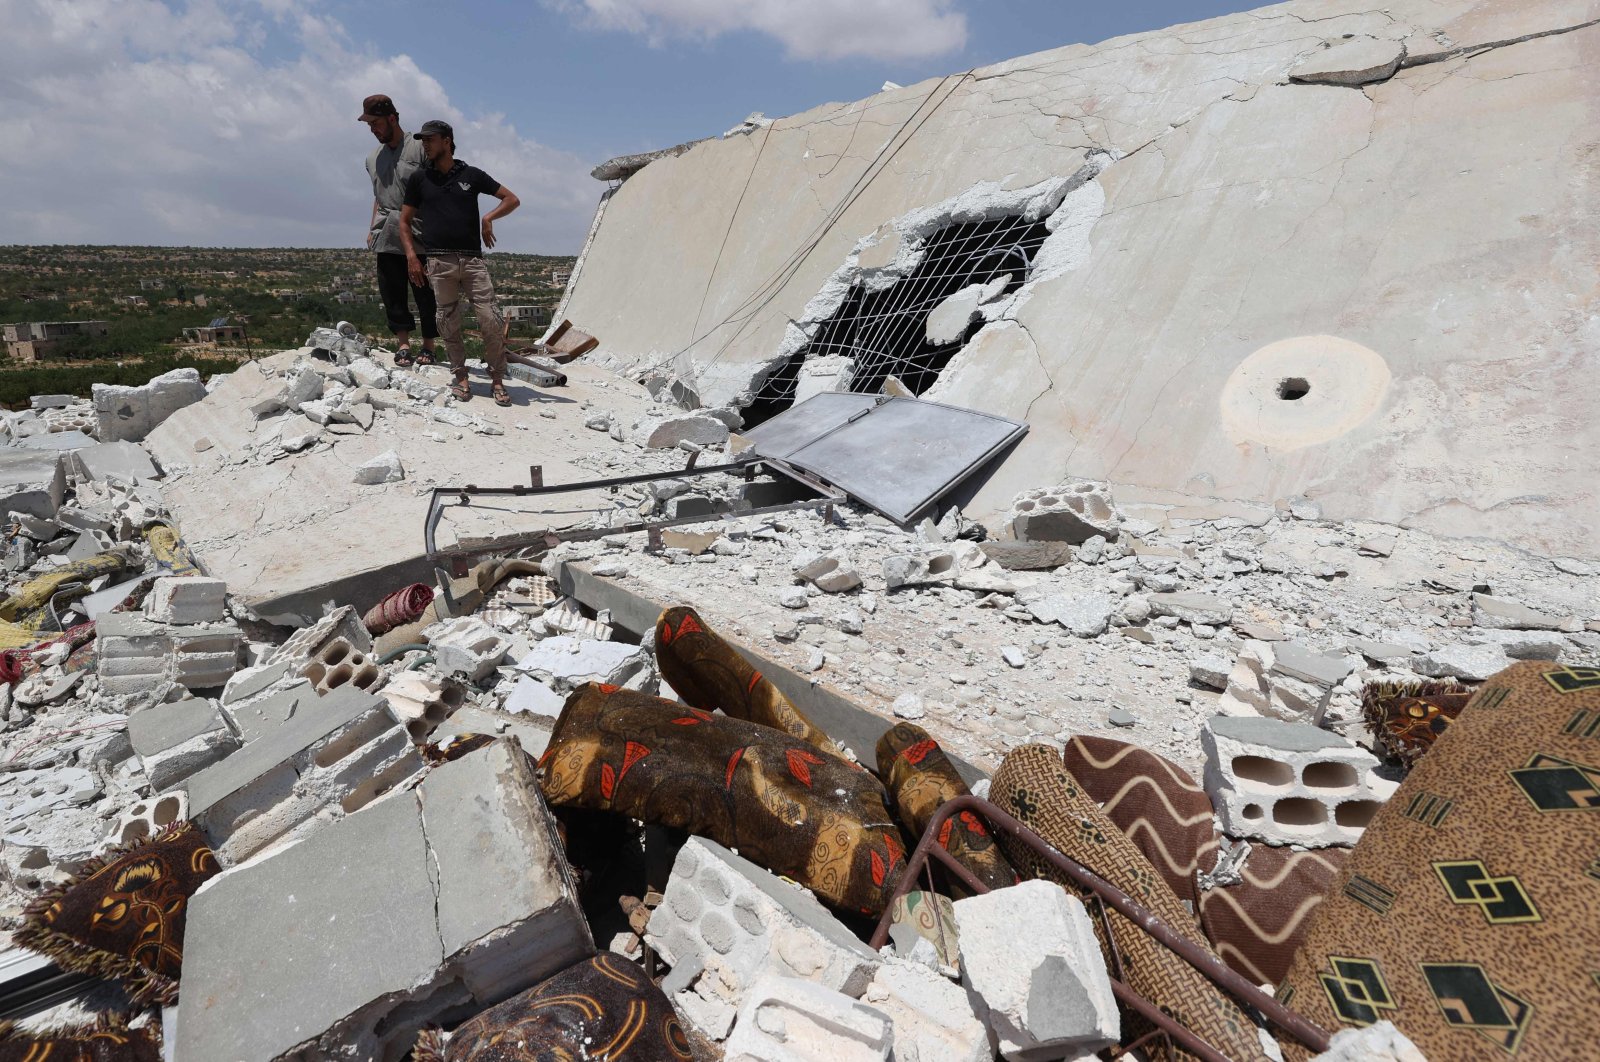 People inspect a damaged house destroyed by a Russian missile attack in the Jabal al-Zawiya region in the south of Syria's rebel-held Idlib province, July 4, 2021. (Photo by Omar Haj Kadour/AFP)